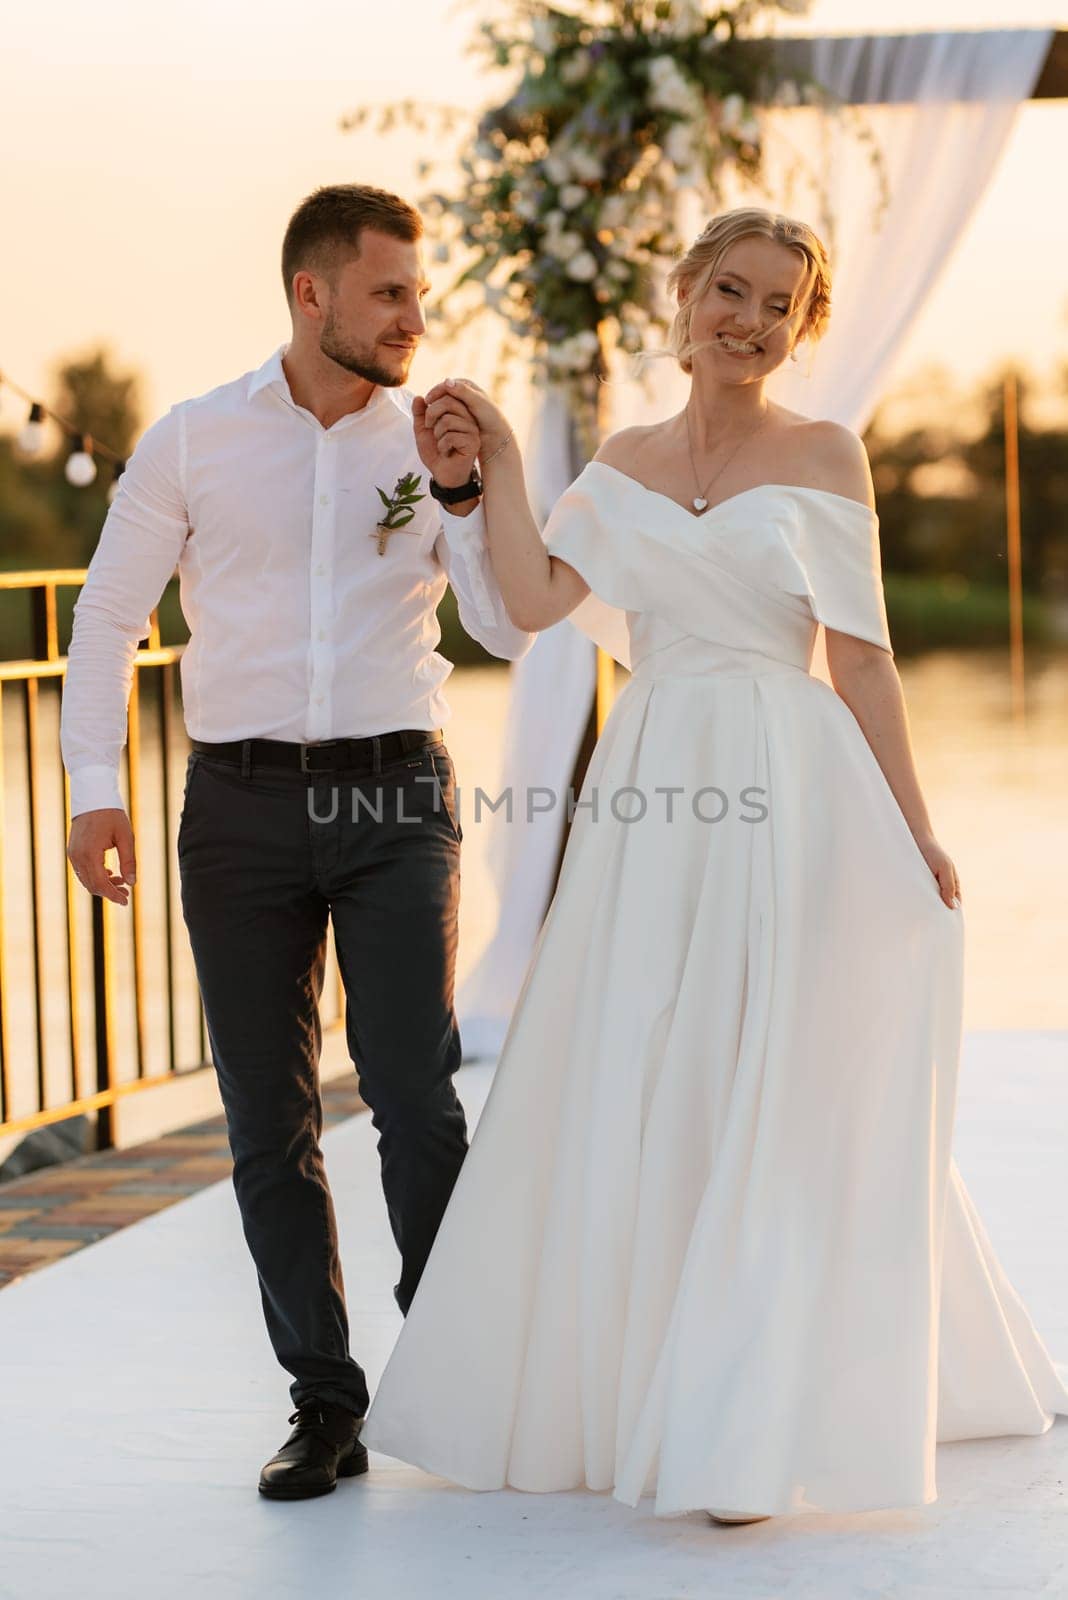 bride and groom against the backdrop of a yellow sunset on a pier near the river